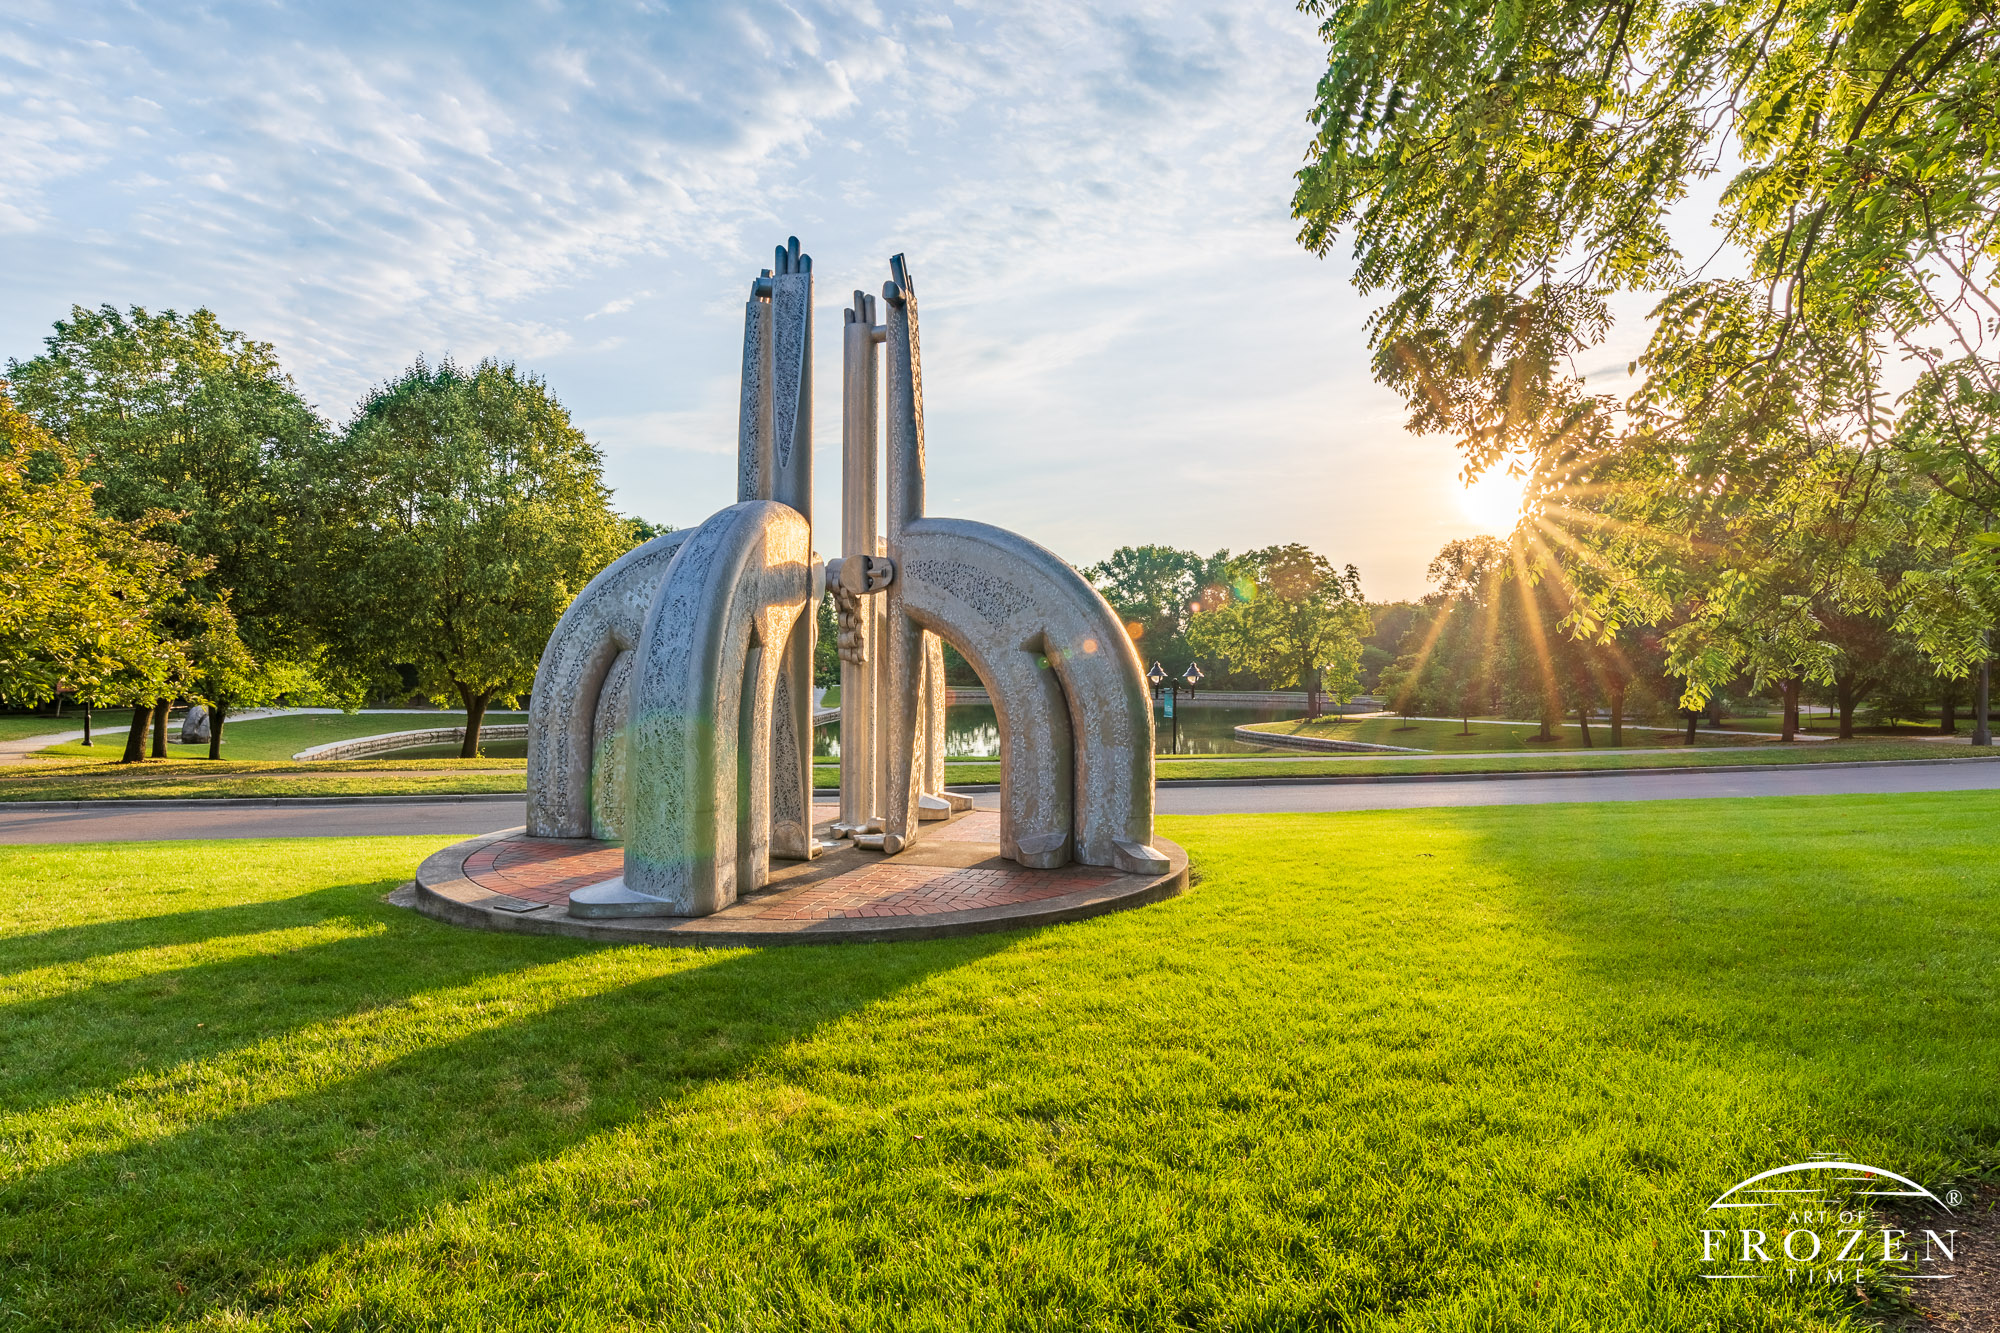 An aluminum sculpture featuring for fanciful figures bask in the golden light on this summer morning in Kettering Ohio’s Lincoln Park